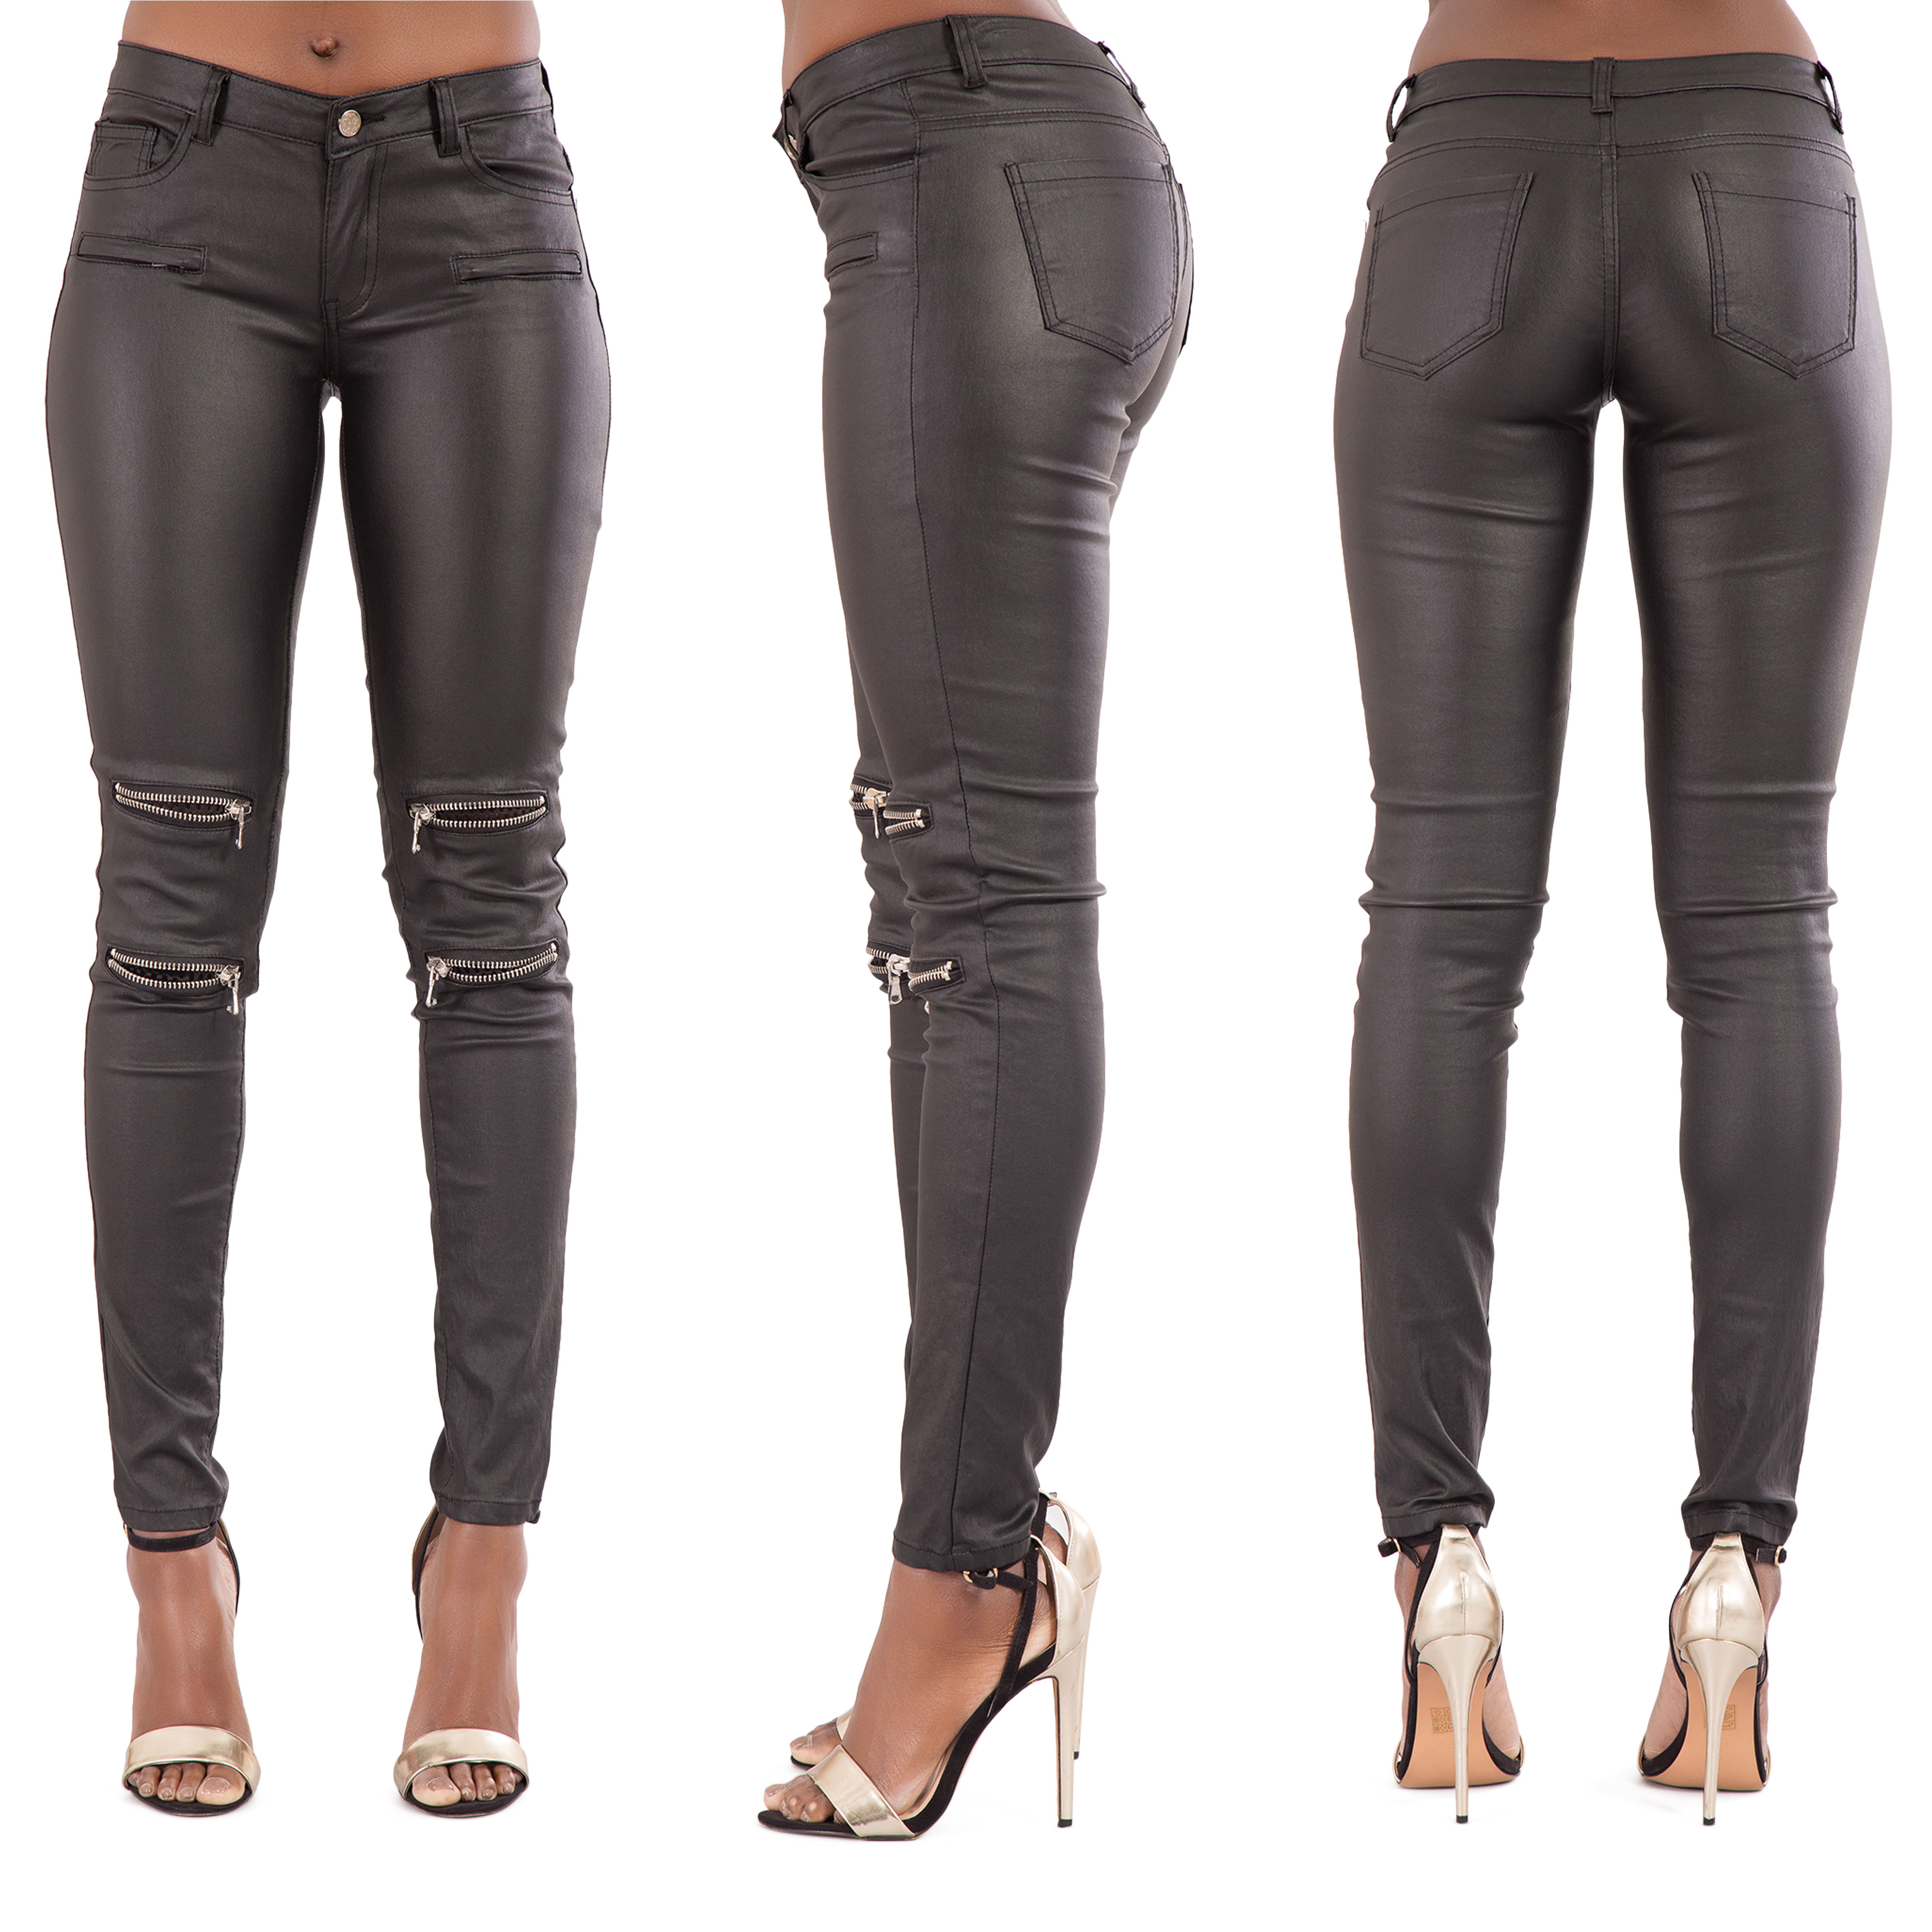 Wetlook Leggings Jeans  International Society of Precision Agriculture